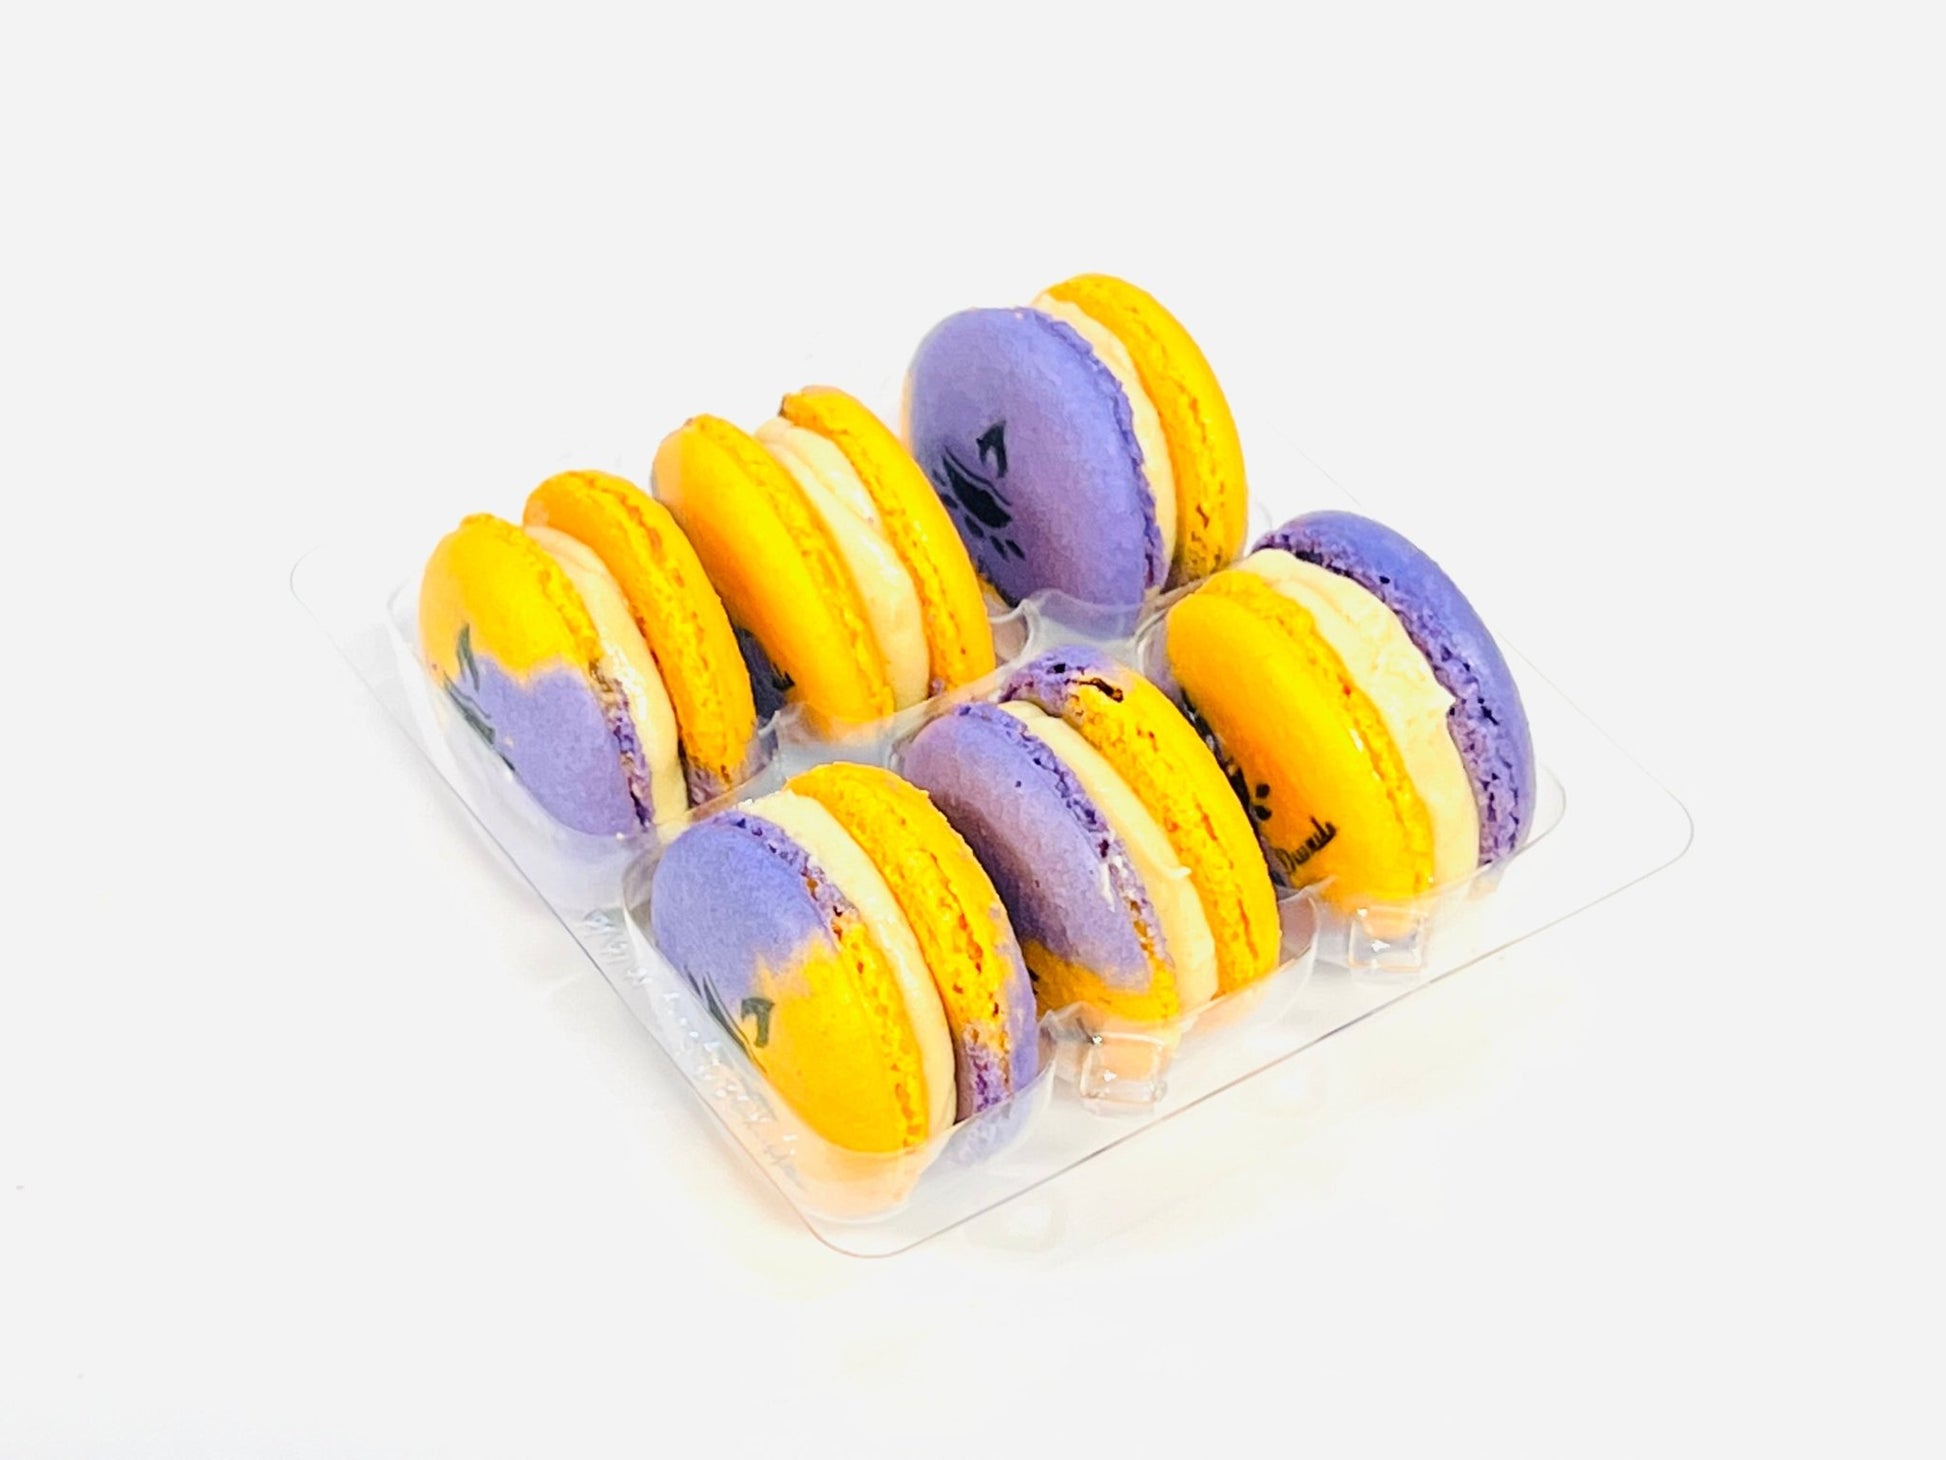 Happy Diwali French Macaron | Available in 6, 12 & 24 Pack | A Perfect Gift for Diwali Celebrations - Macaron CentraleCashew & Dates6 pack